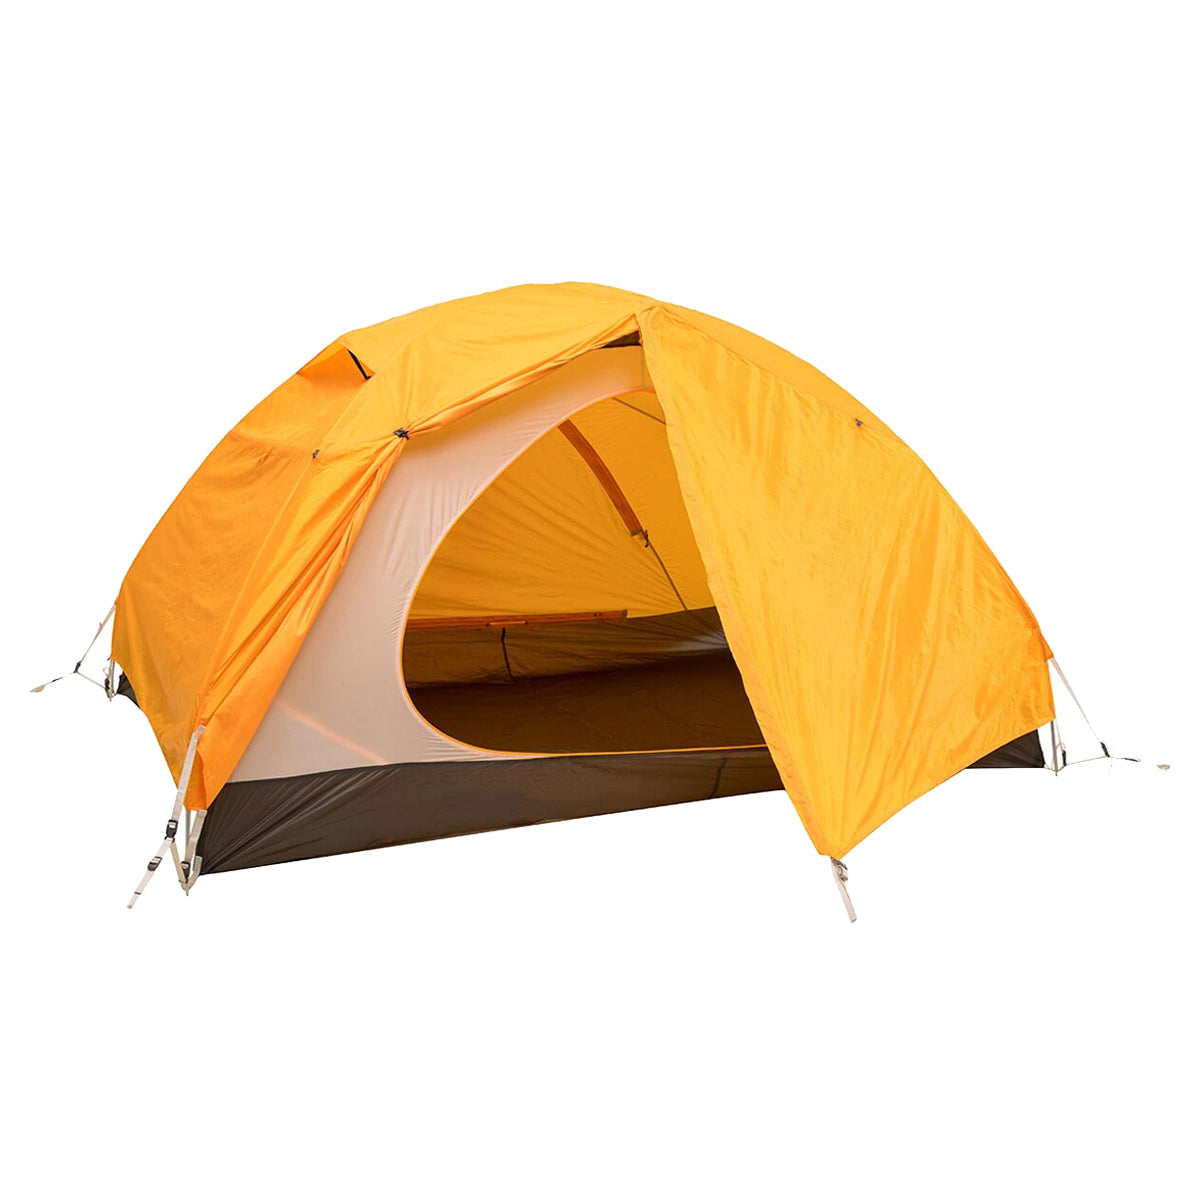 Marmot Fortress UL 3 Person Tent in  by GOHUNT | Marmot - GOHUNT Shop